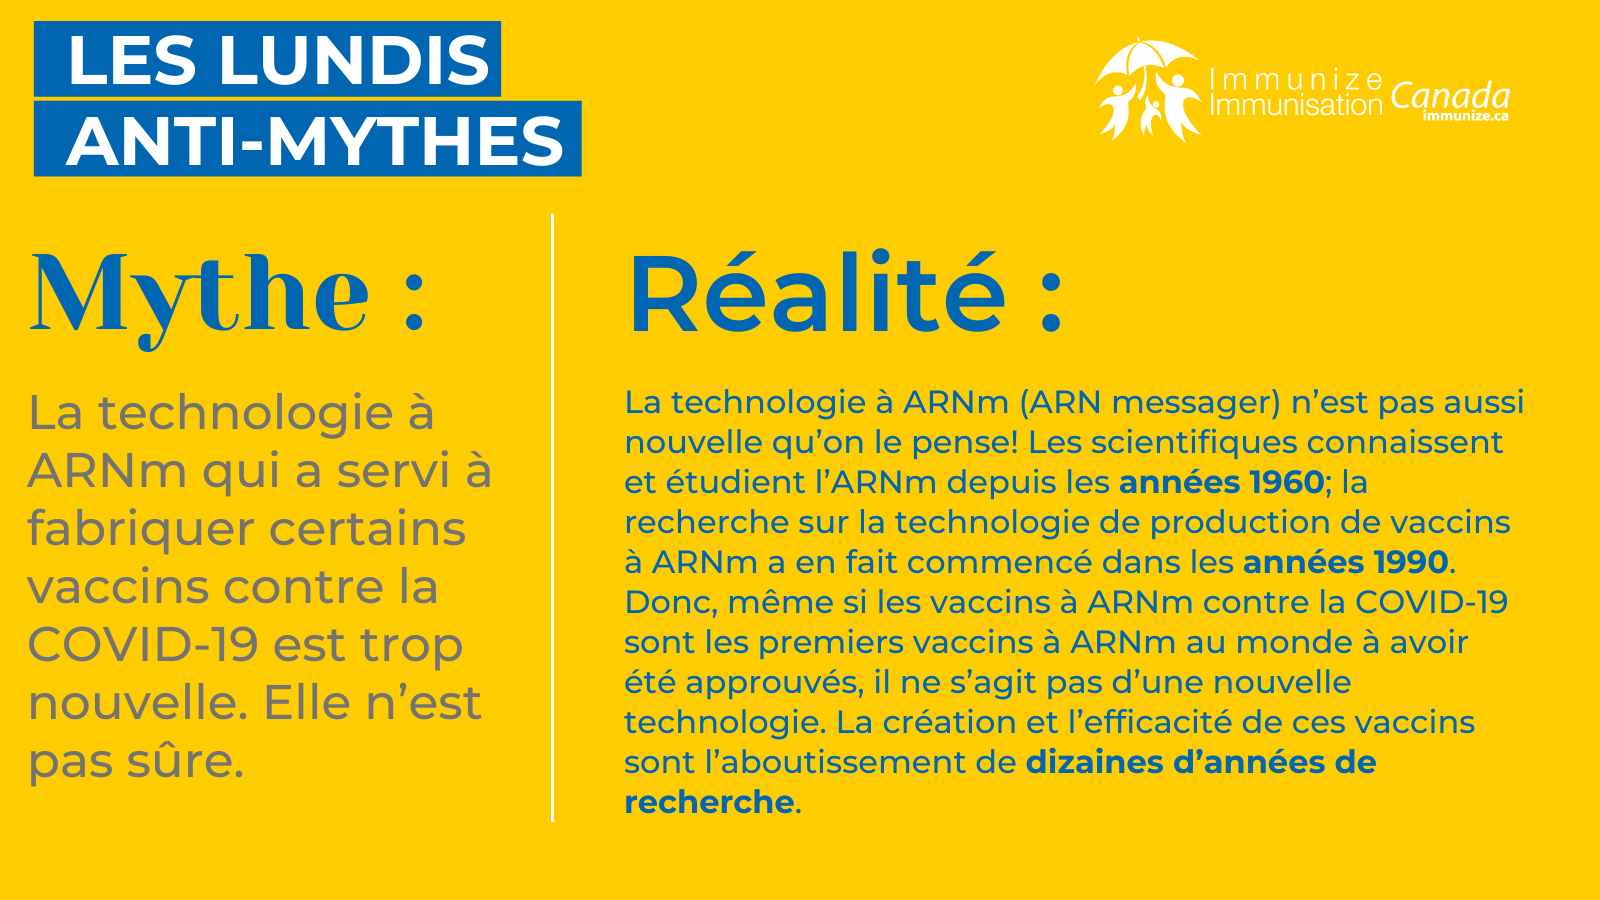 Les lundis anti-mythes - COVID-19 - image 12 pour Twitter/X